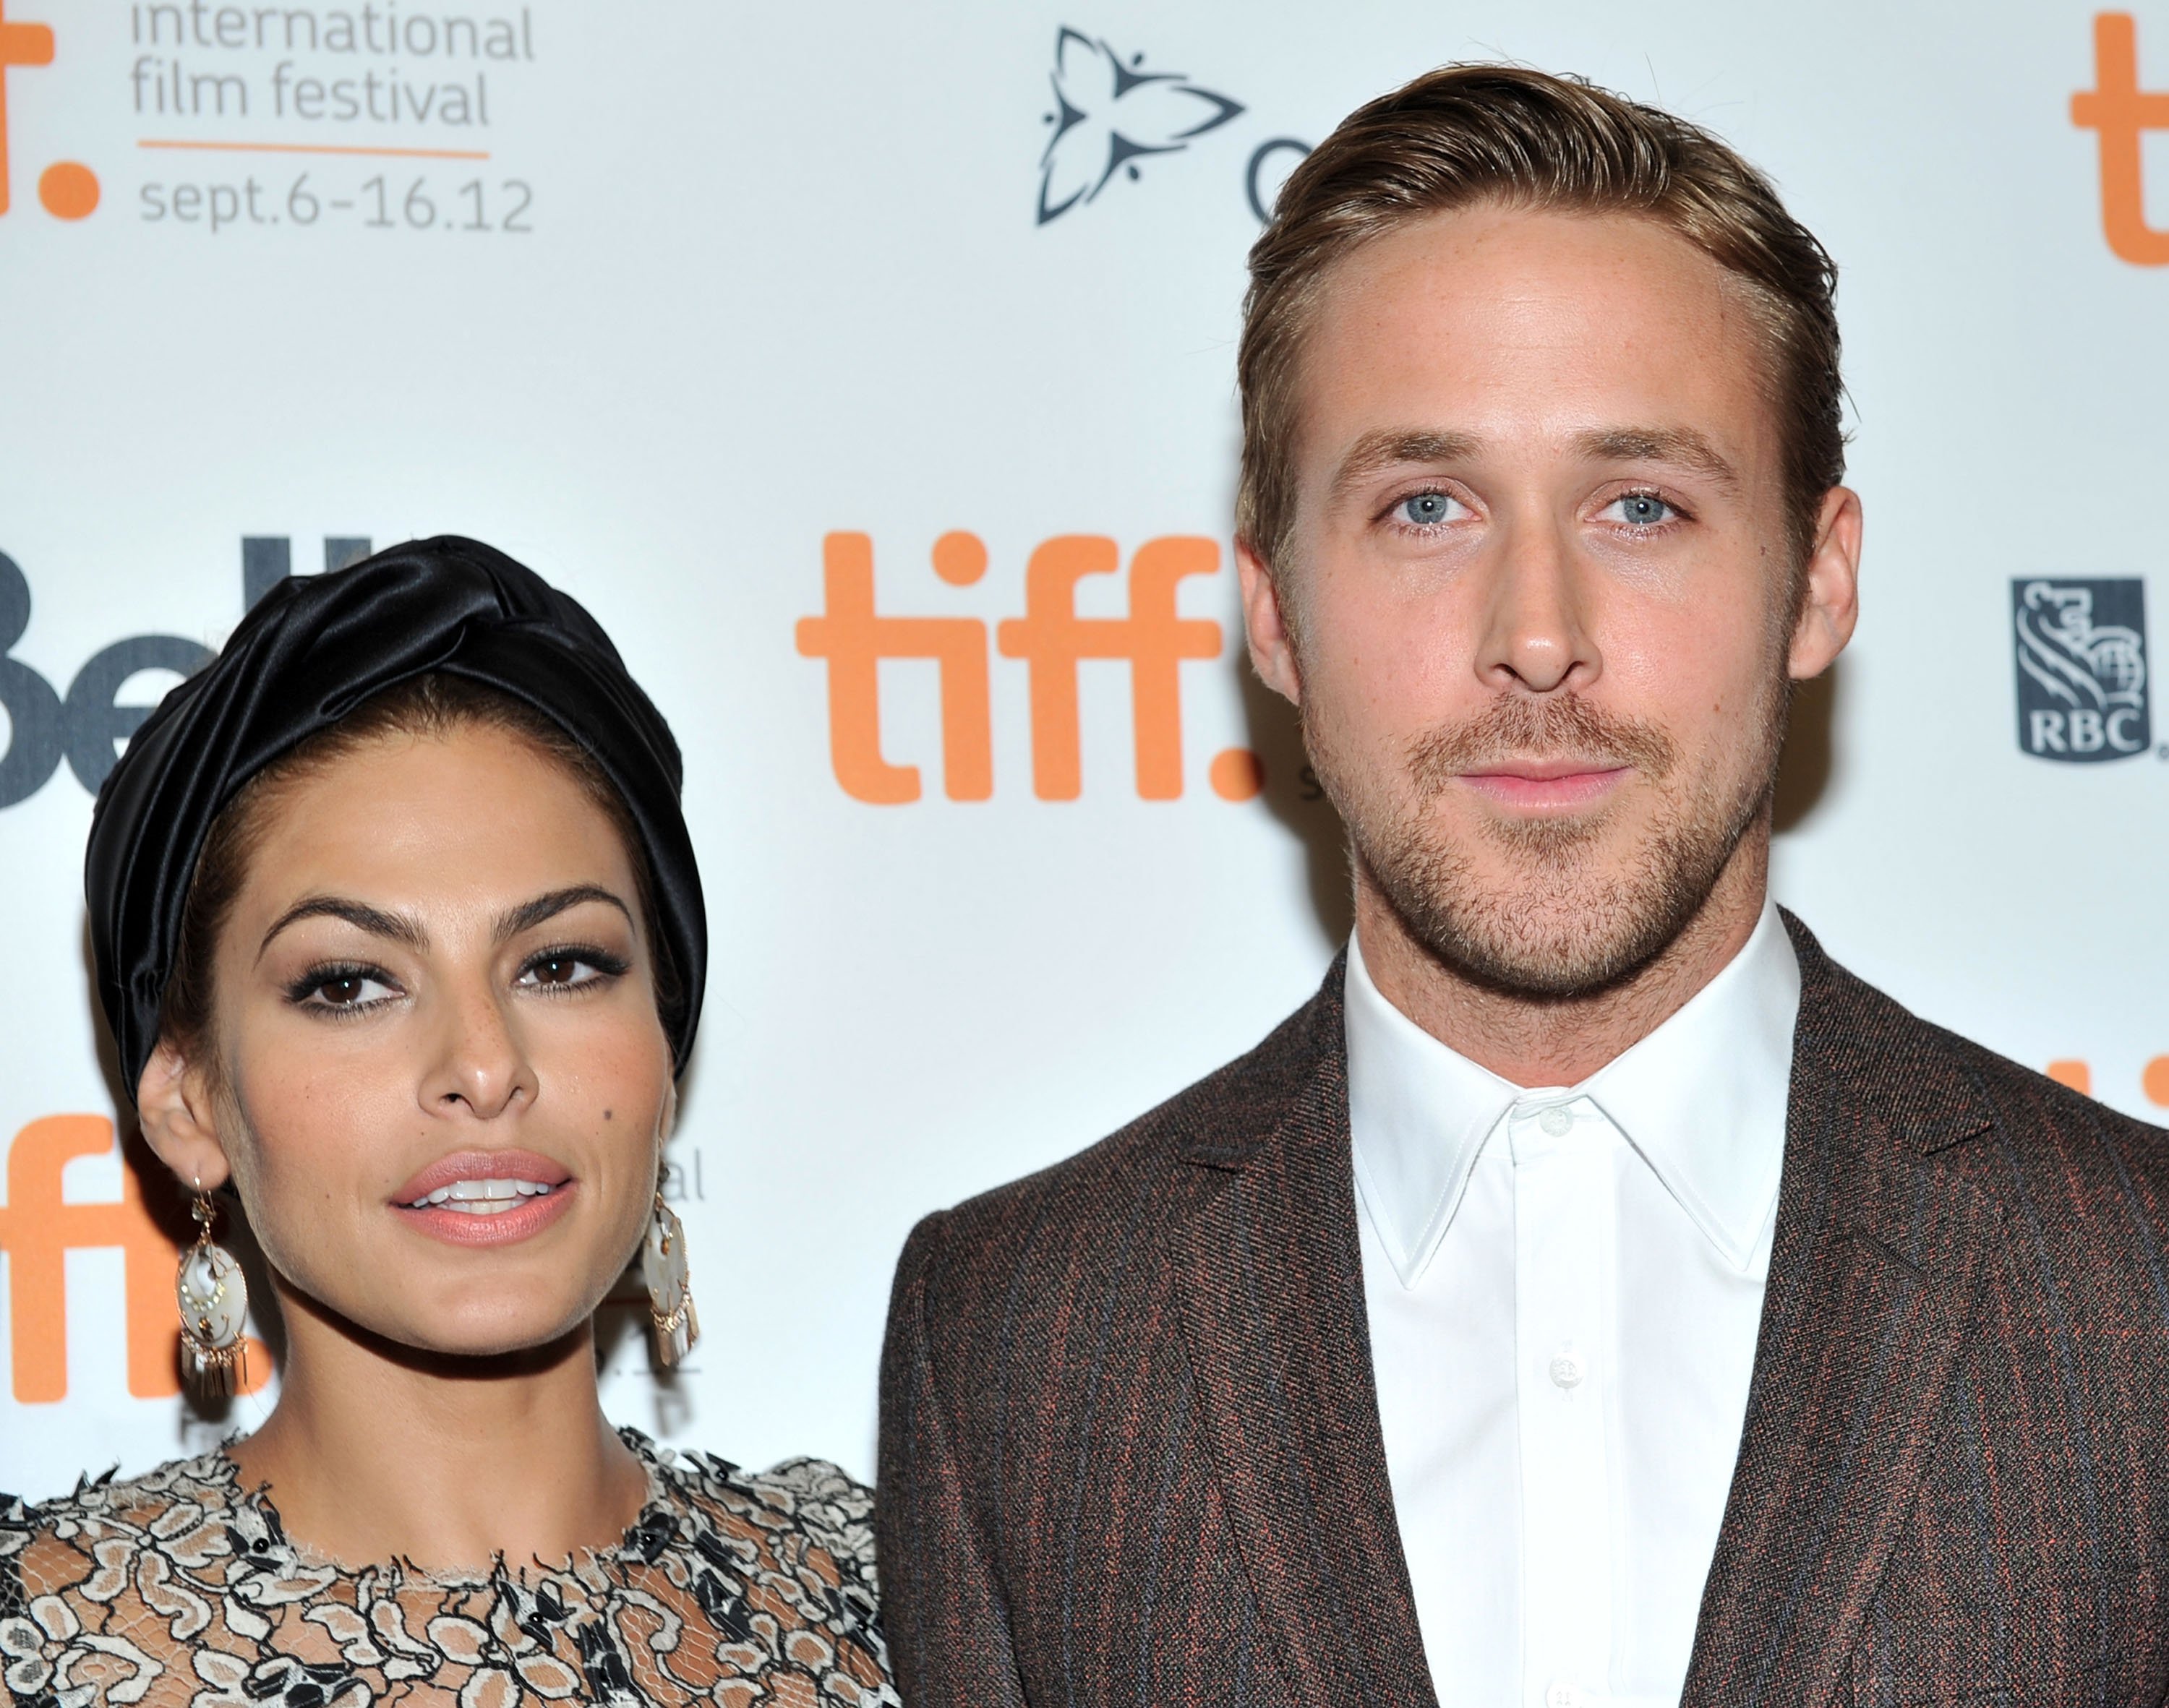 Eva Mendes and Ryan Gosling at the premiere of "The Place Beyond The Pines" on September 7, 2012 | Source: Getty Images